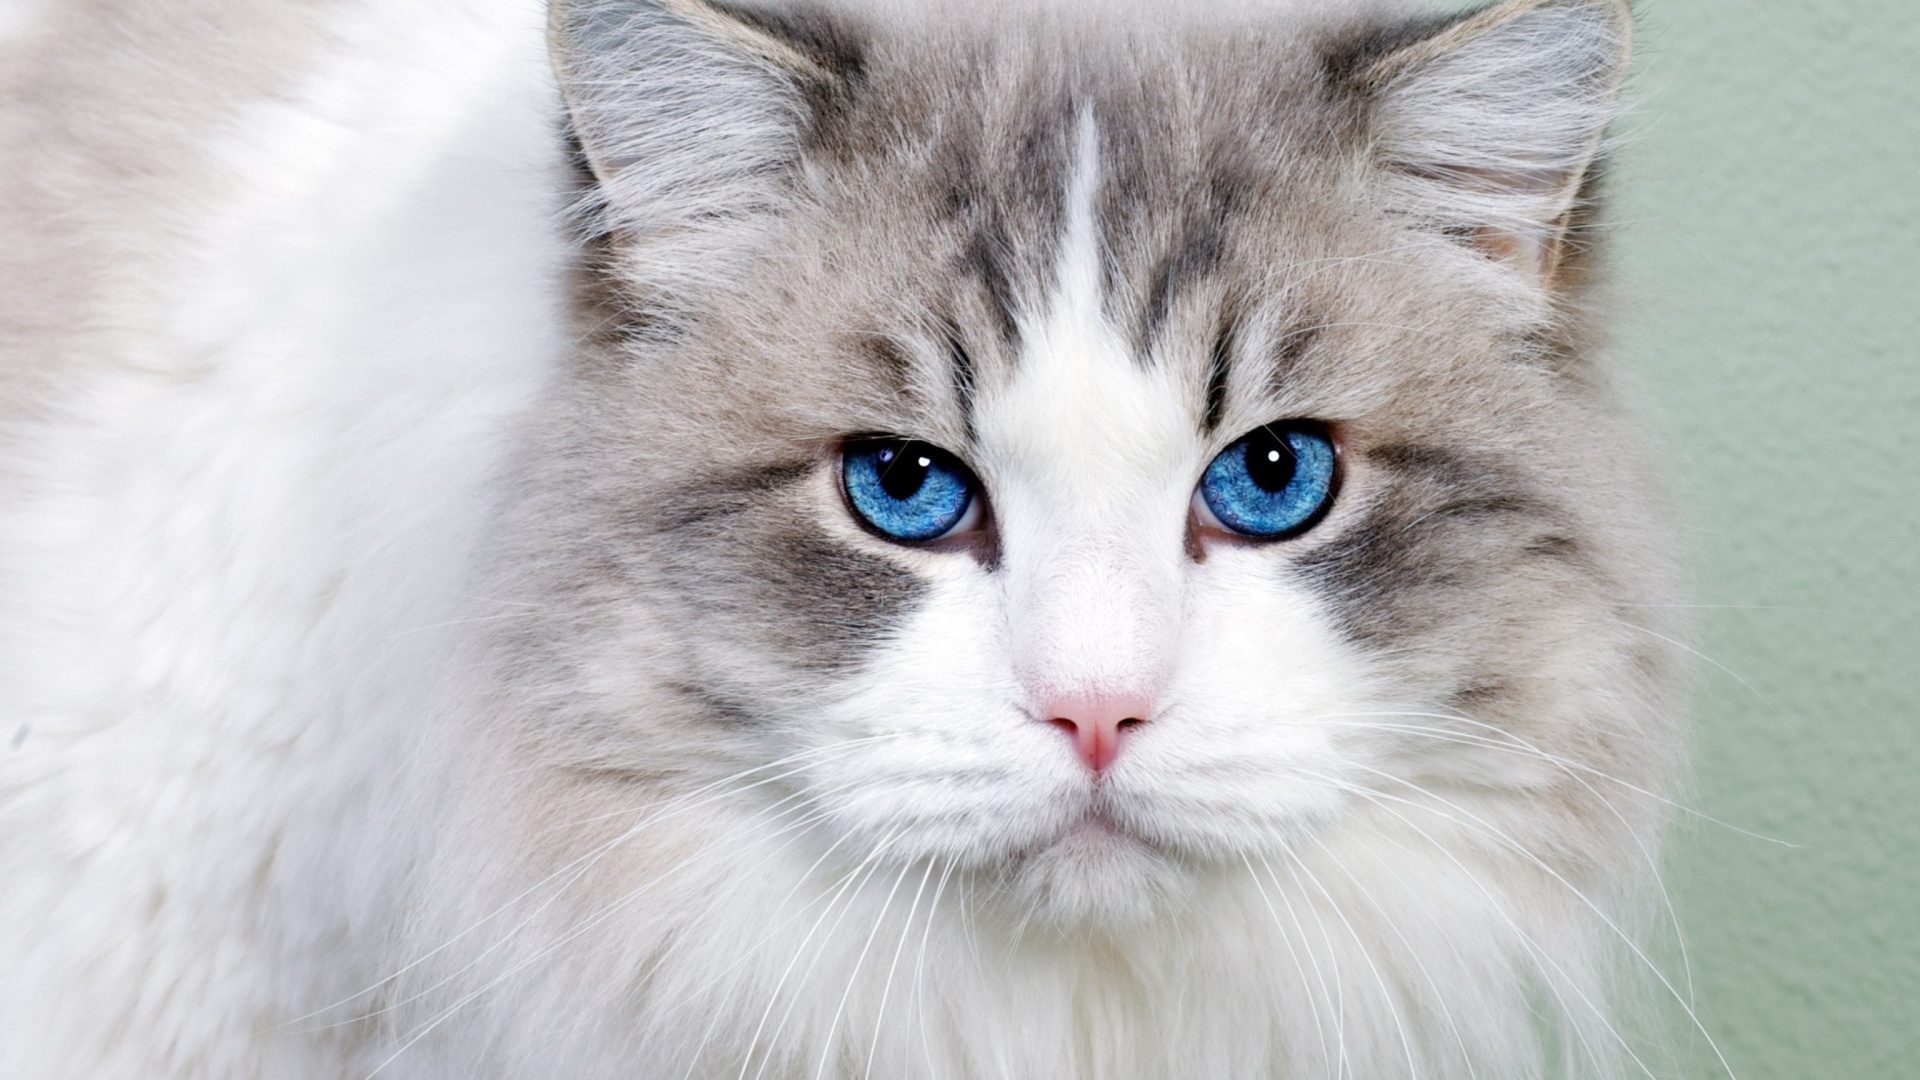 Cat with Blue Eyes wallpaper 1920x1080